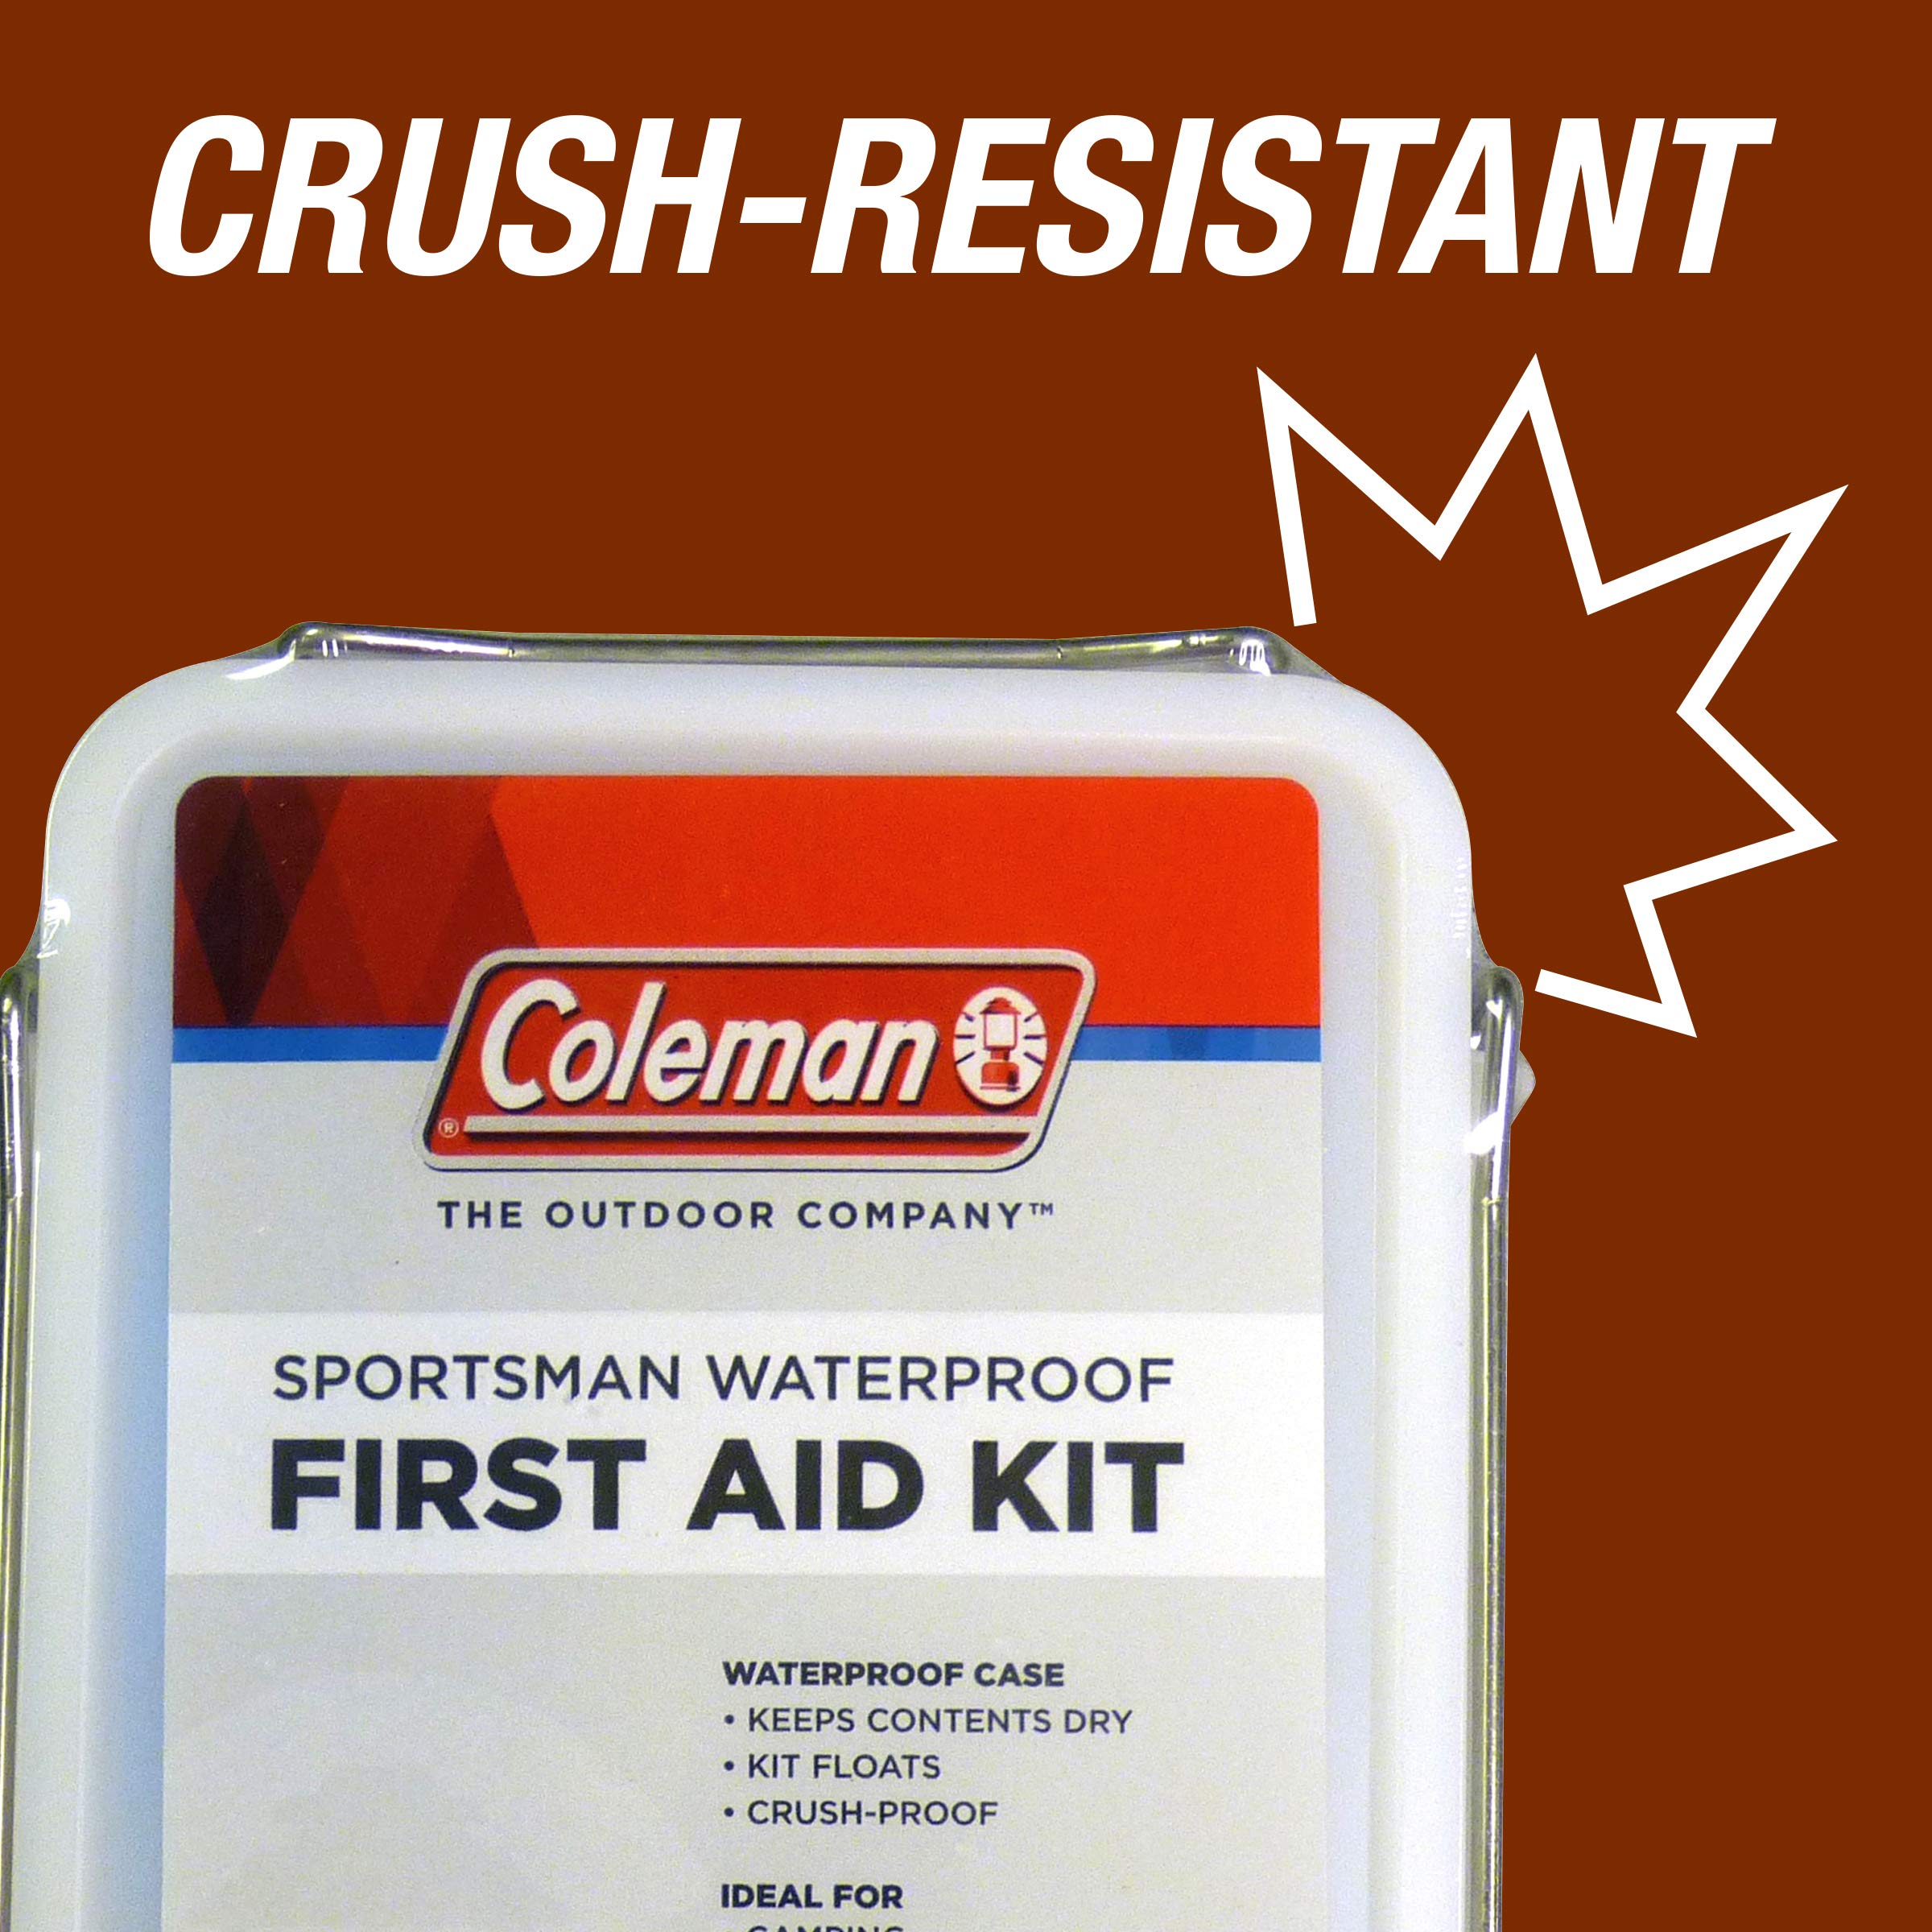 Coleman Sportsman Waterproof First Aid Kit - 100 Pieces